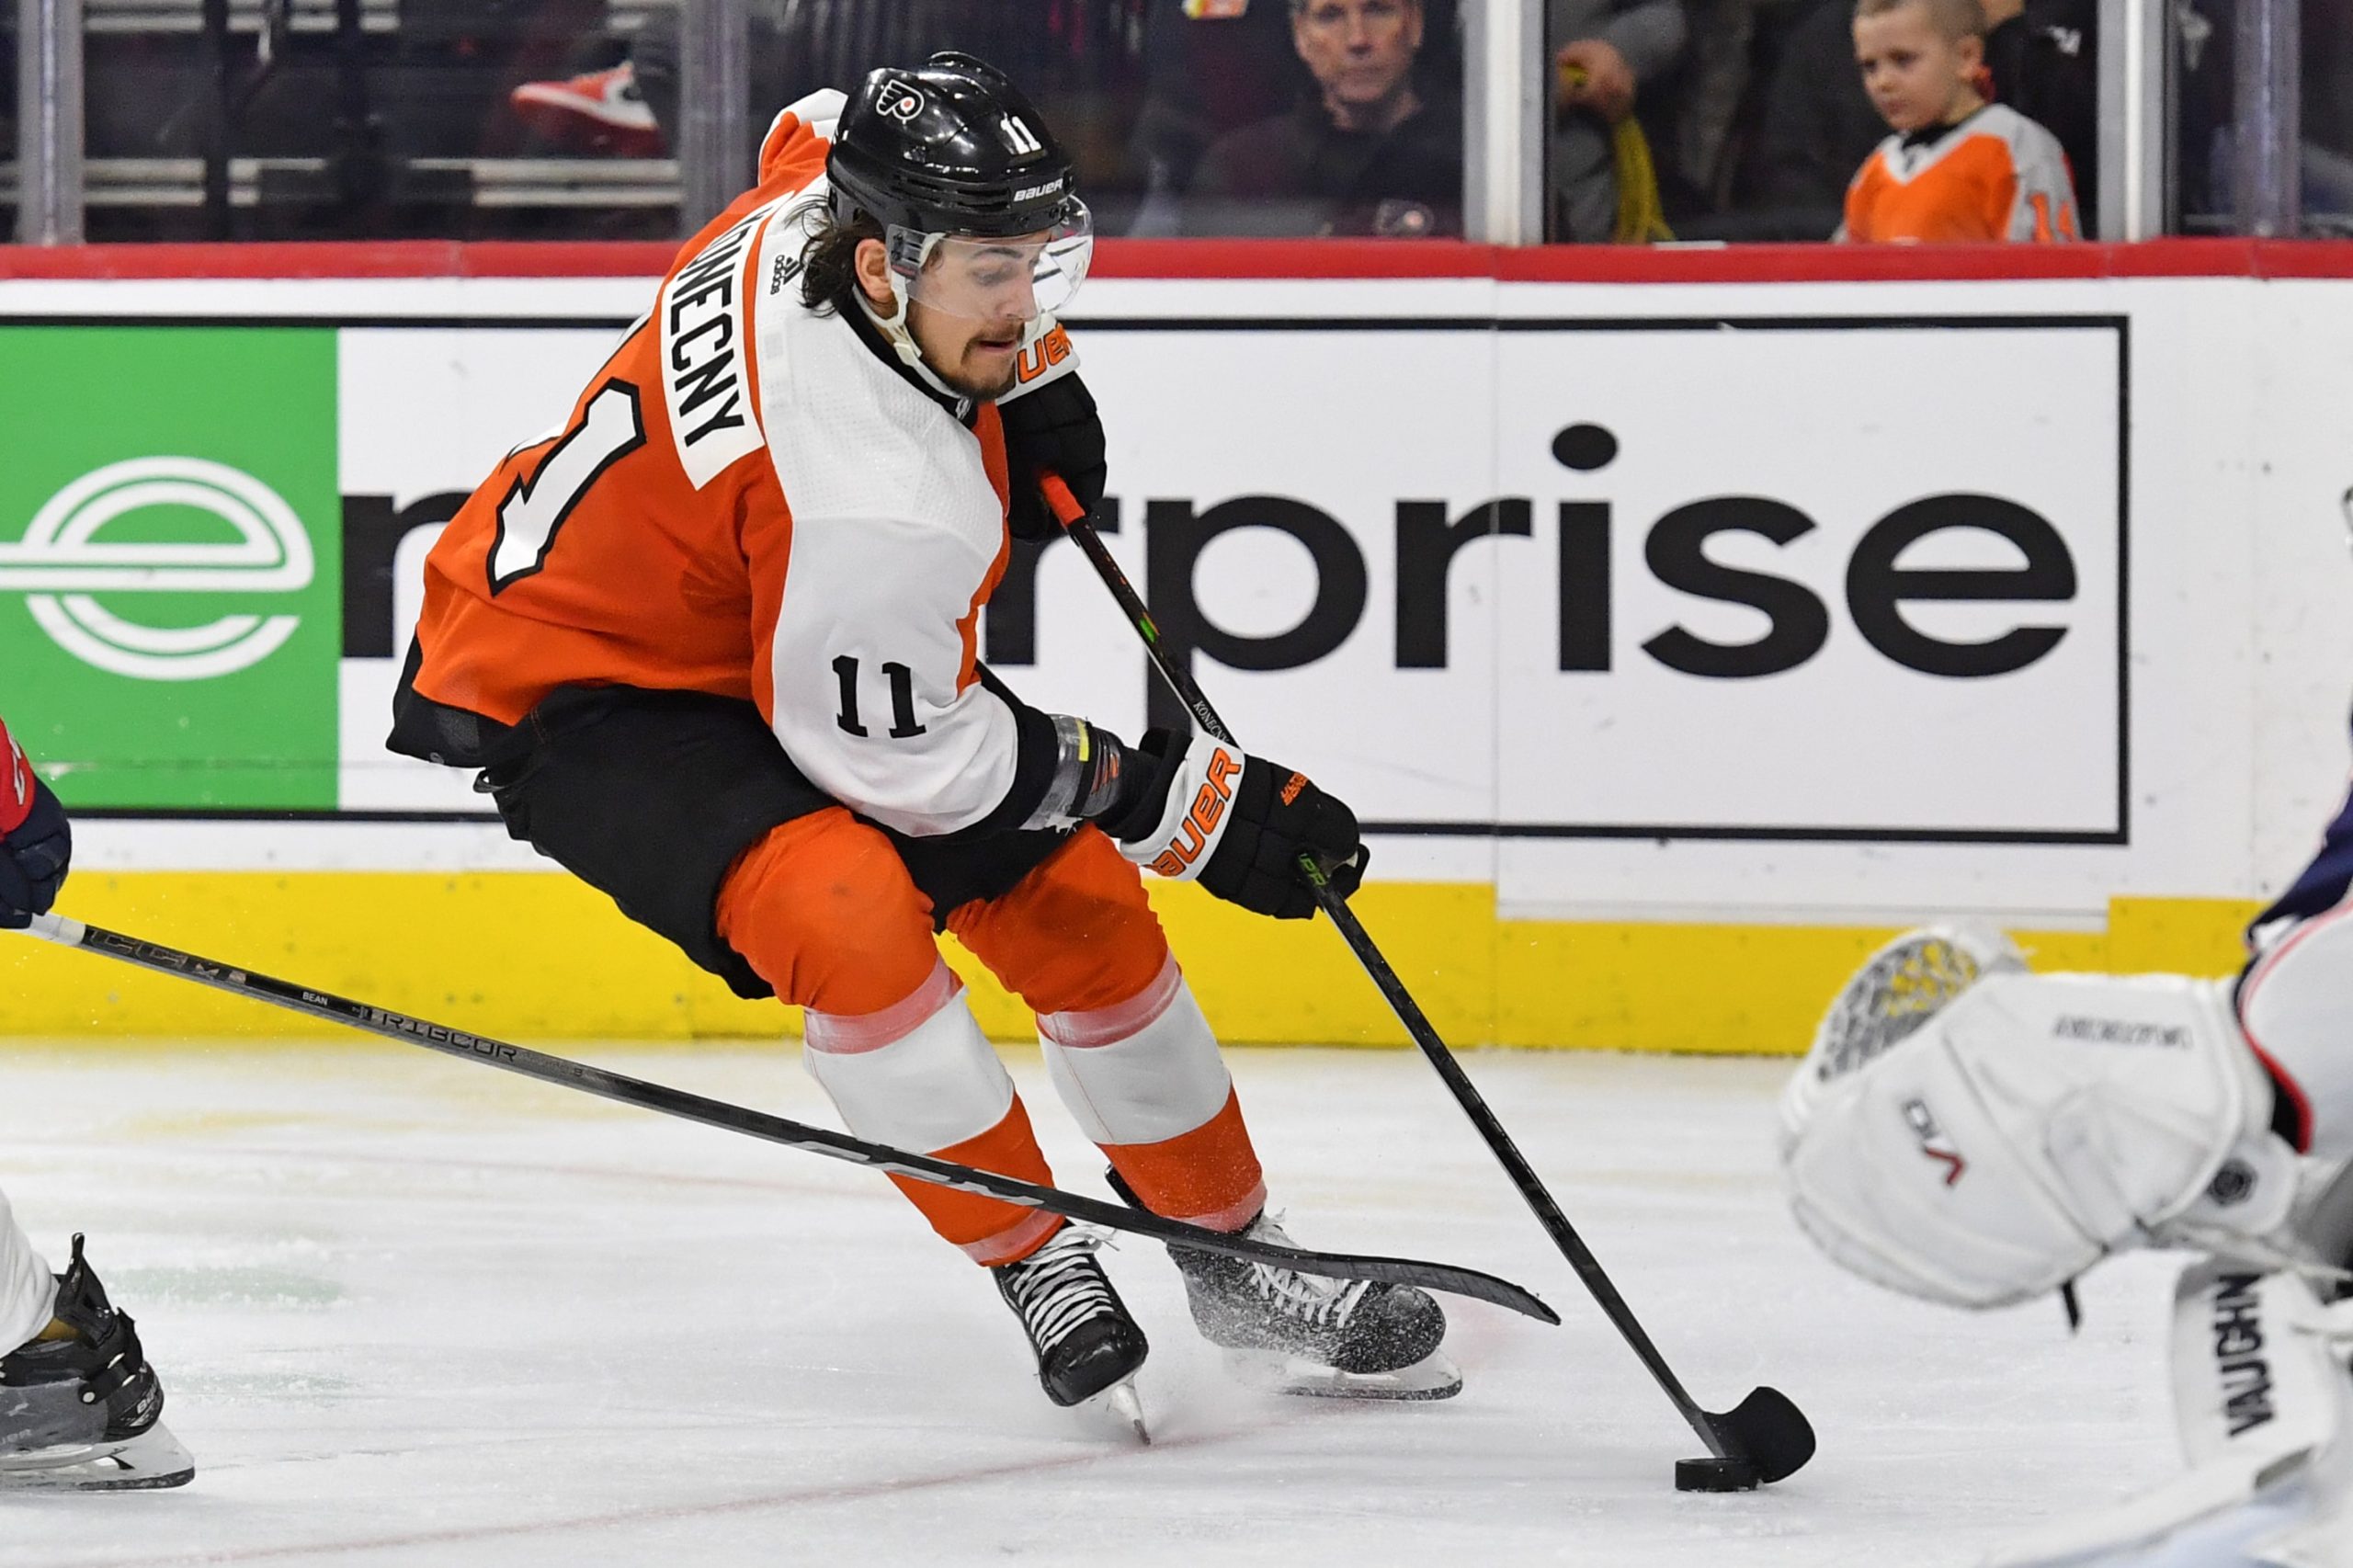 Flyers vs. Canadiens prediction: NHL odds, picks, bets for Wednesday